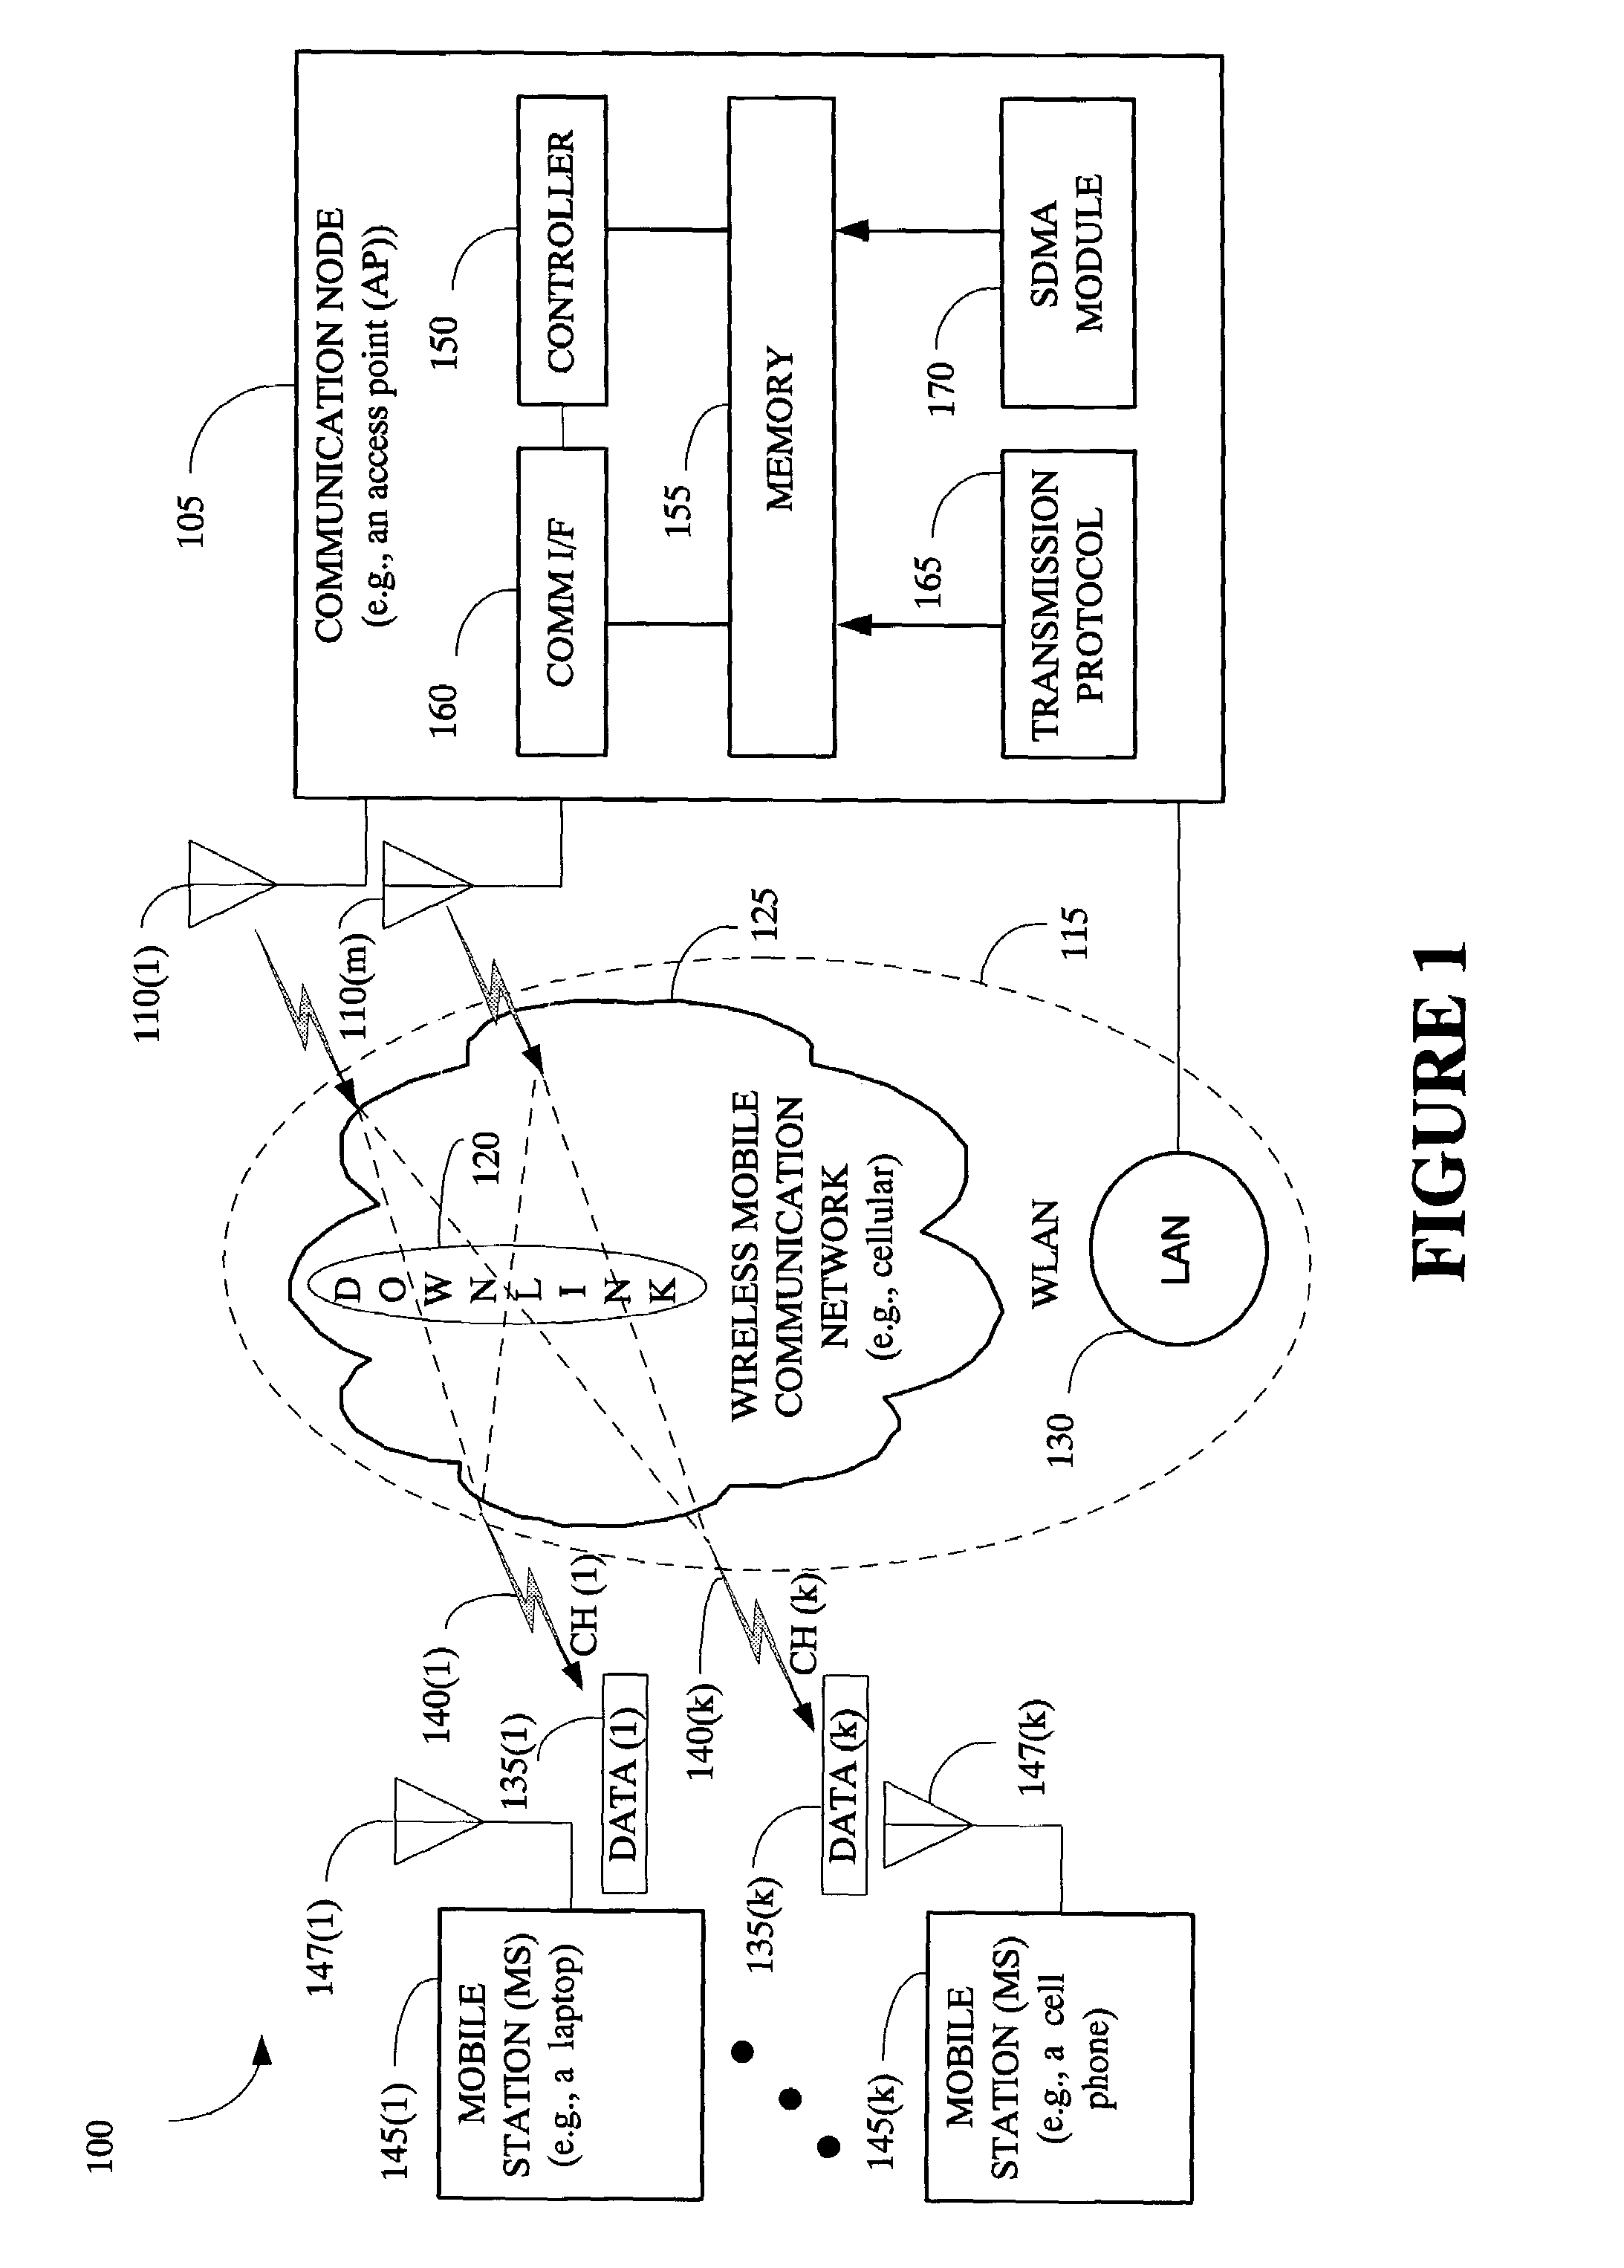 Communicating data between an access point and multiple wireless devices over a link